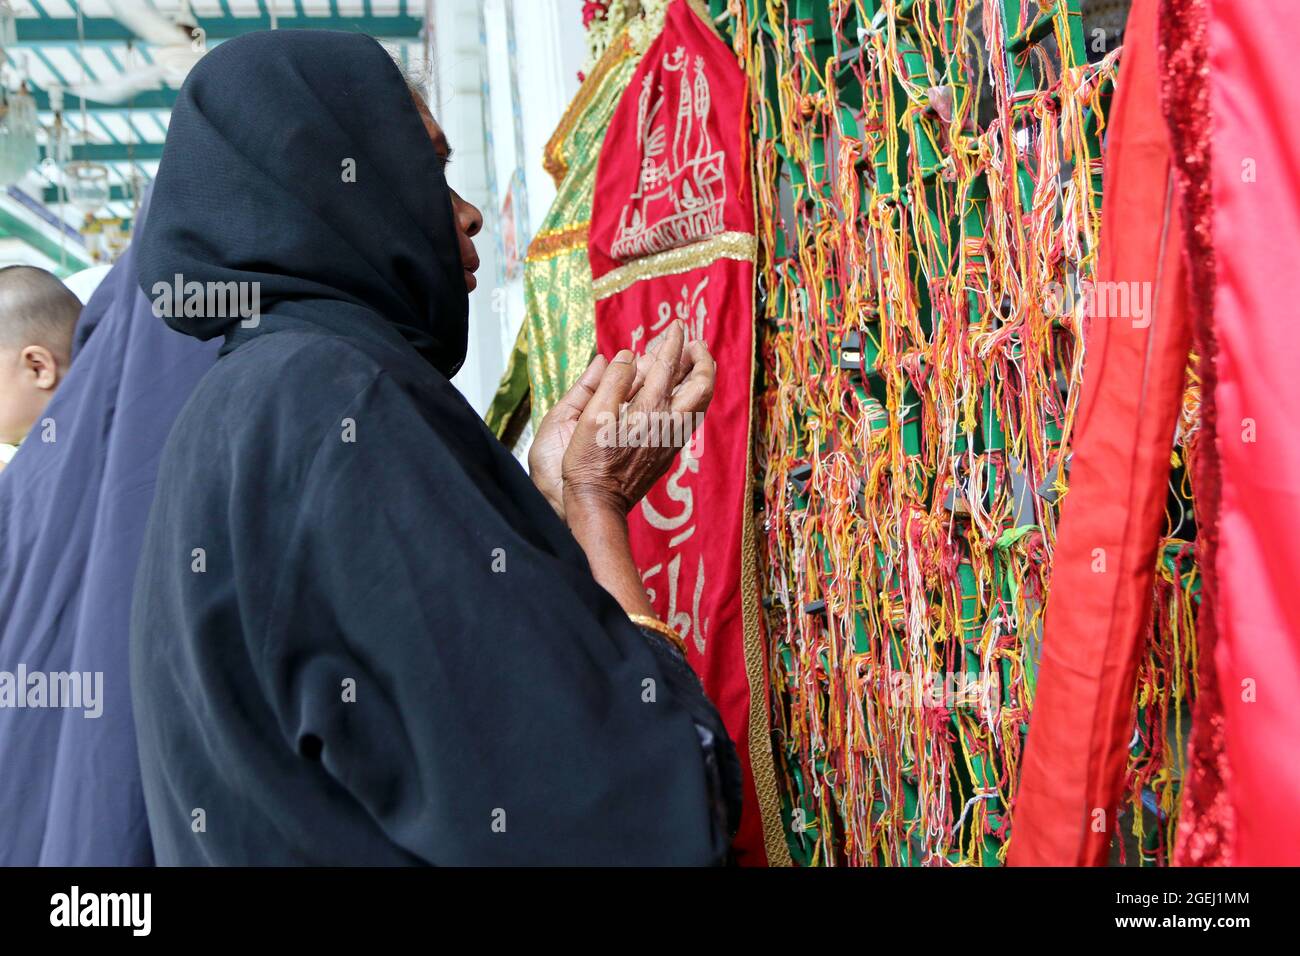 Dhaka, Bangladesh, August 20: A shia woman prays  during  the day of mourning to commemorate Ashura Day. The tenth day of Muharram is celebrated as Ashura, Shia muslims celebrate the day as mourning day to recalling the martyrdom of Prophet Hazrat Muhammad's grandson Hazrat Imam Hussain, his relatives and 72 supporters during the clash of Karbala on this day in the Hijri year of 61. Credit: Habibur Rahman / Eyepix Group/Alamy Live News Stock Photo